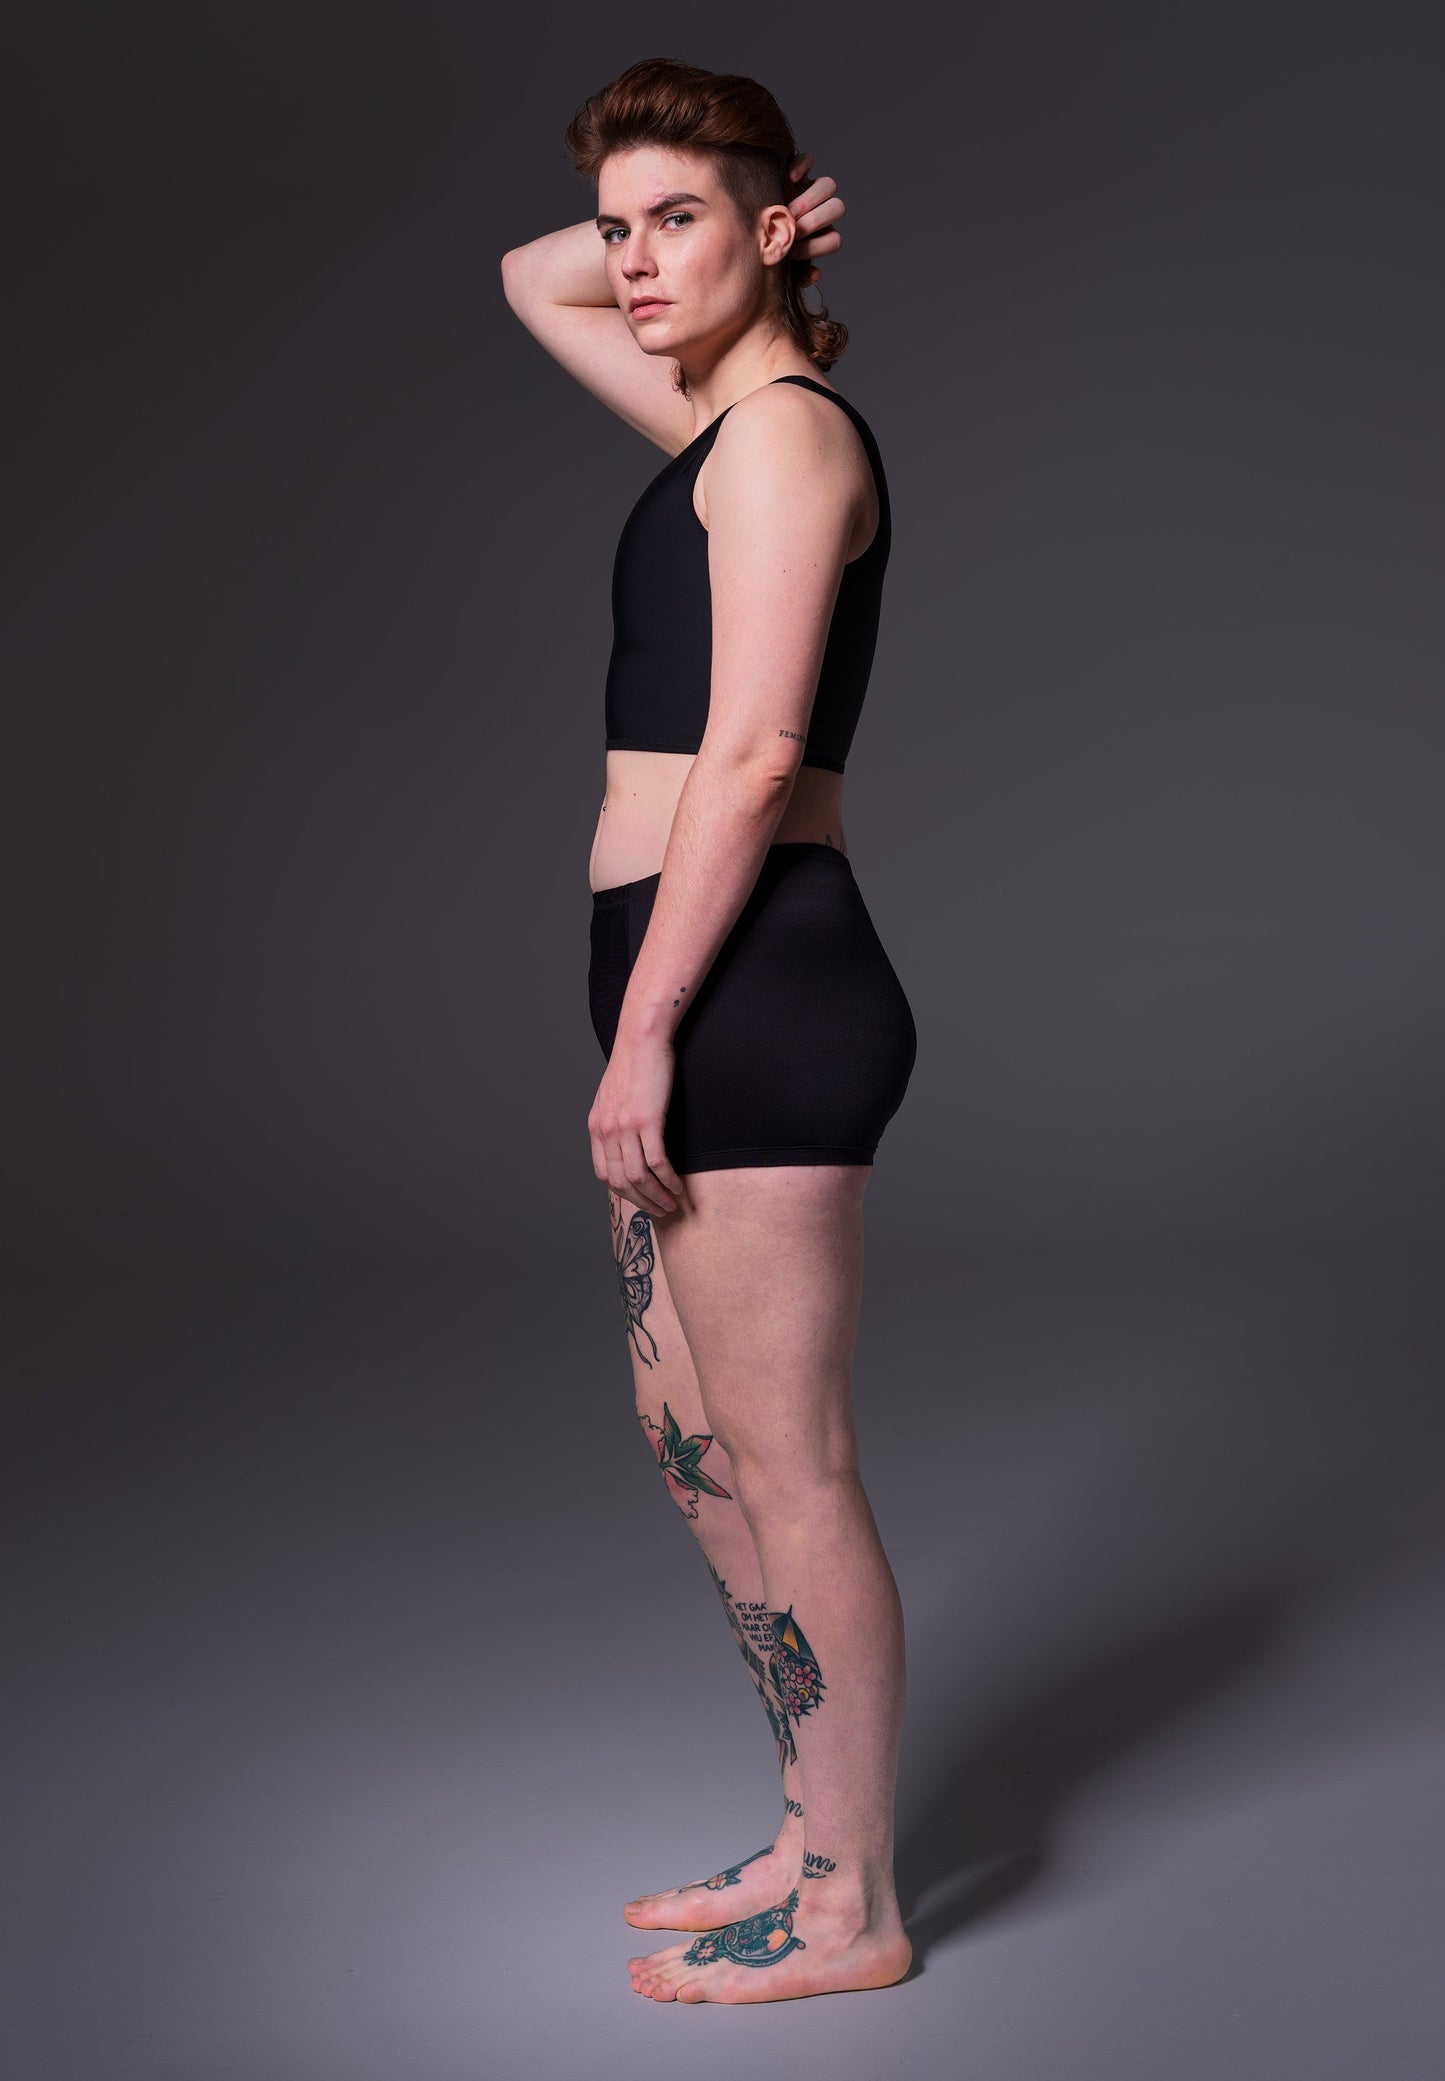 Model Lene wearing the Boxershorts in black, seen from the side, designed by UNTAG